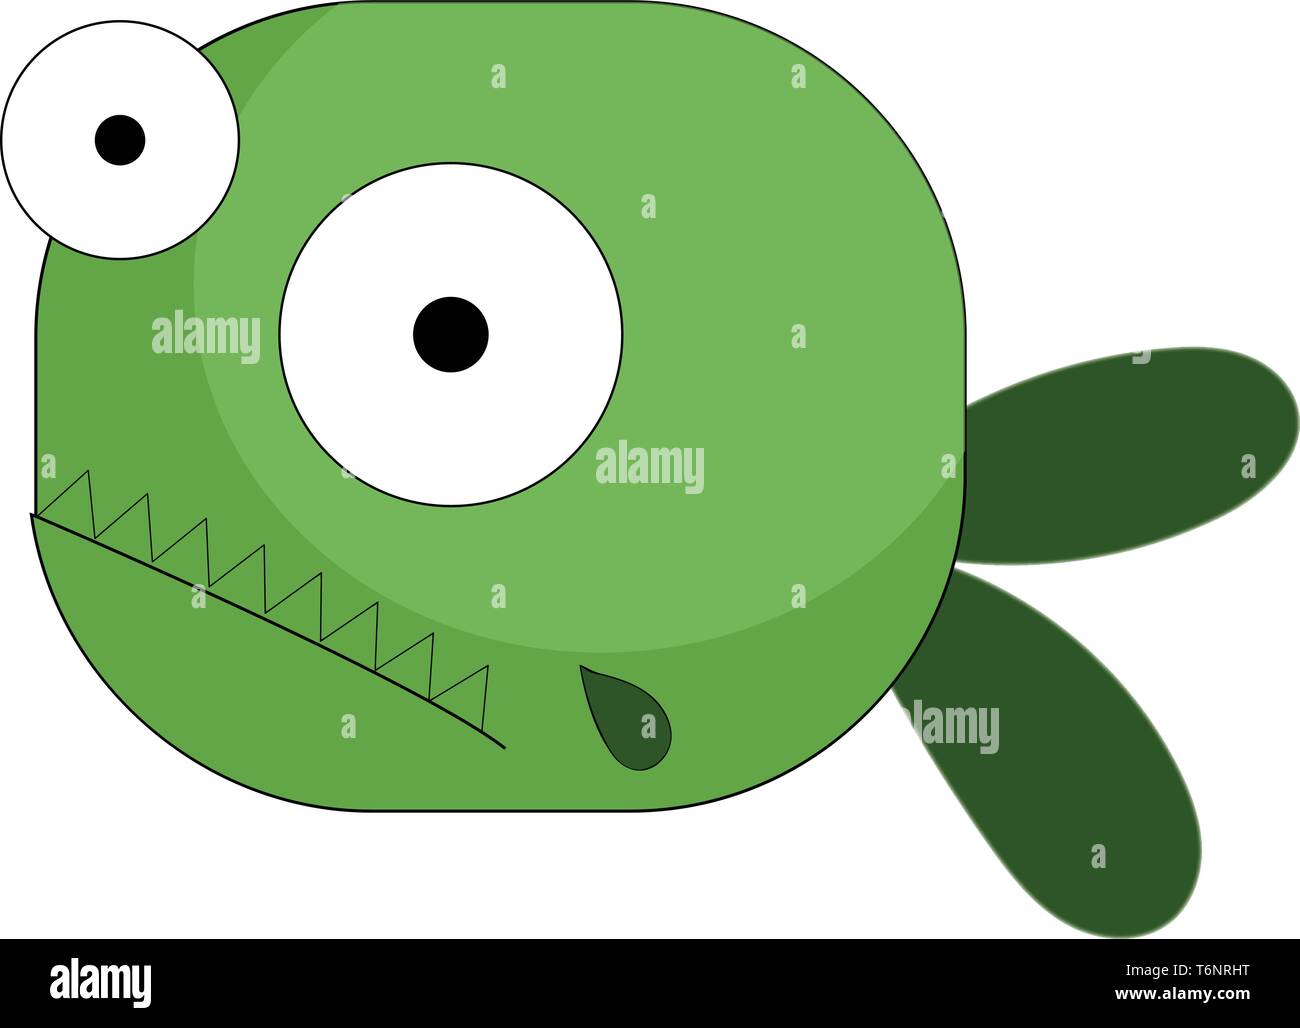 Cartoon green fish with two bulging eyes  forked tail has spike-like teeth projecting outward  vector  color drawing or illustration Stock Vector